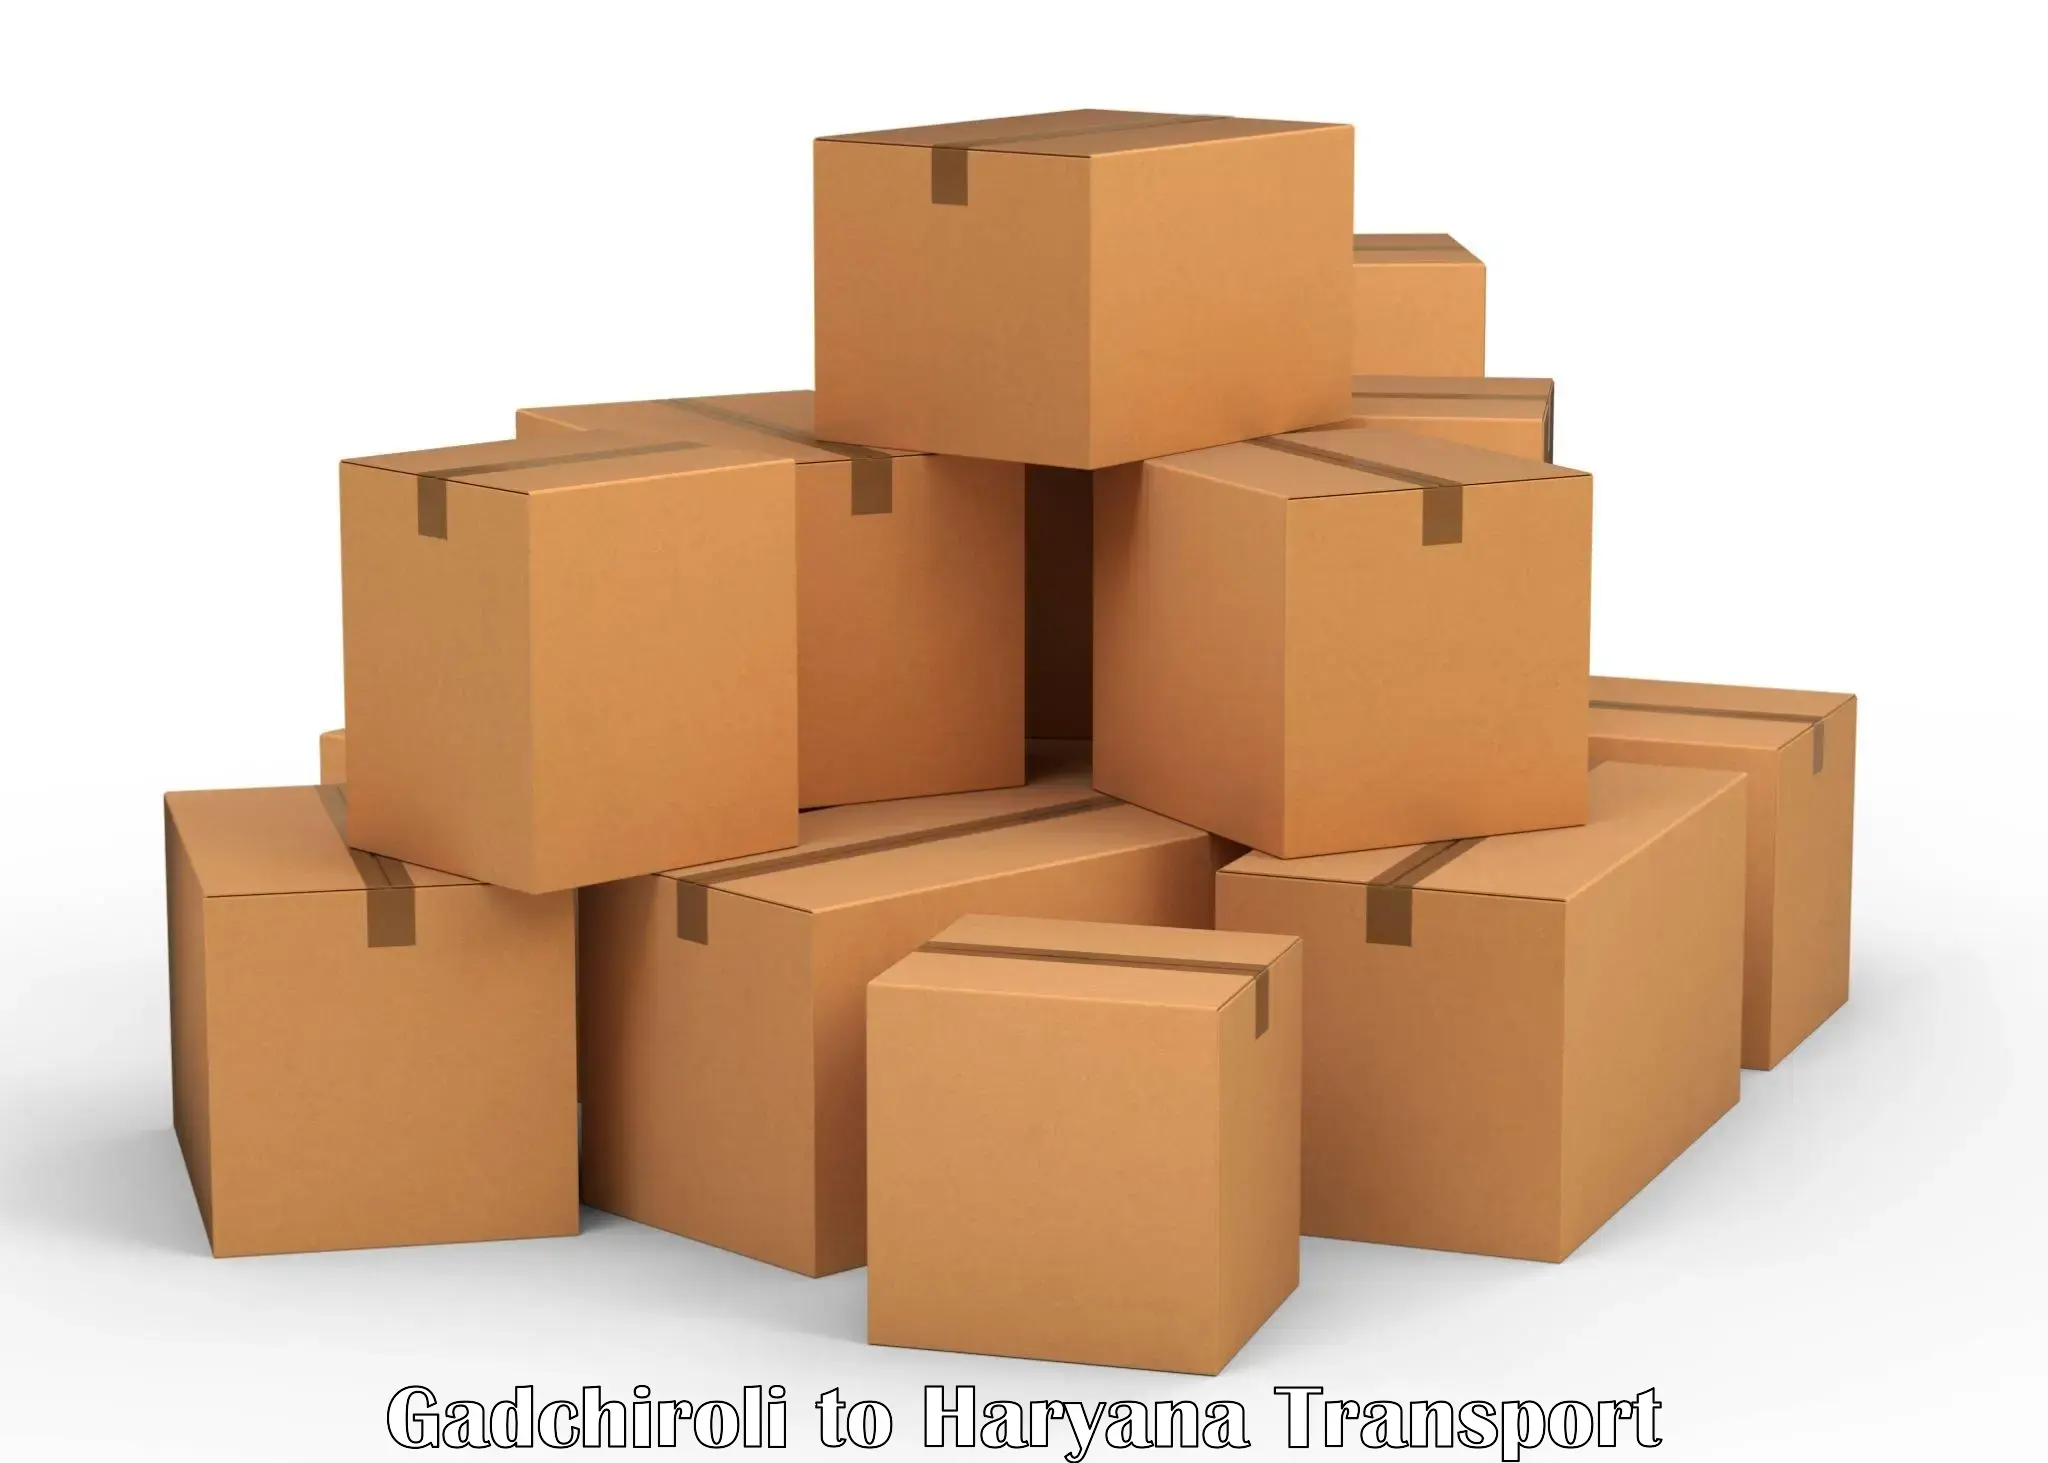 Air freight transport services in Gadchiroli to NCR Haryana